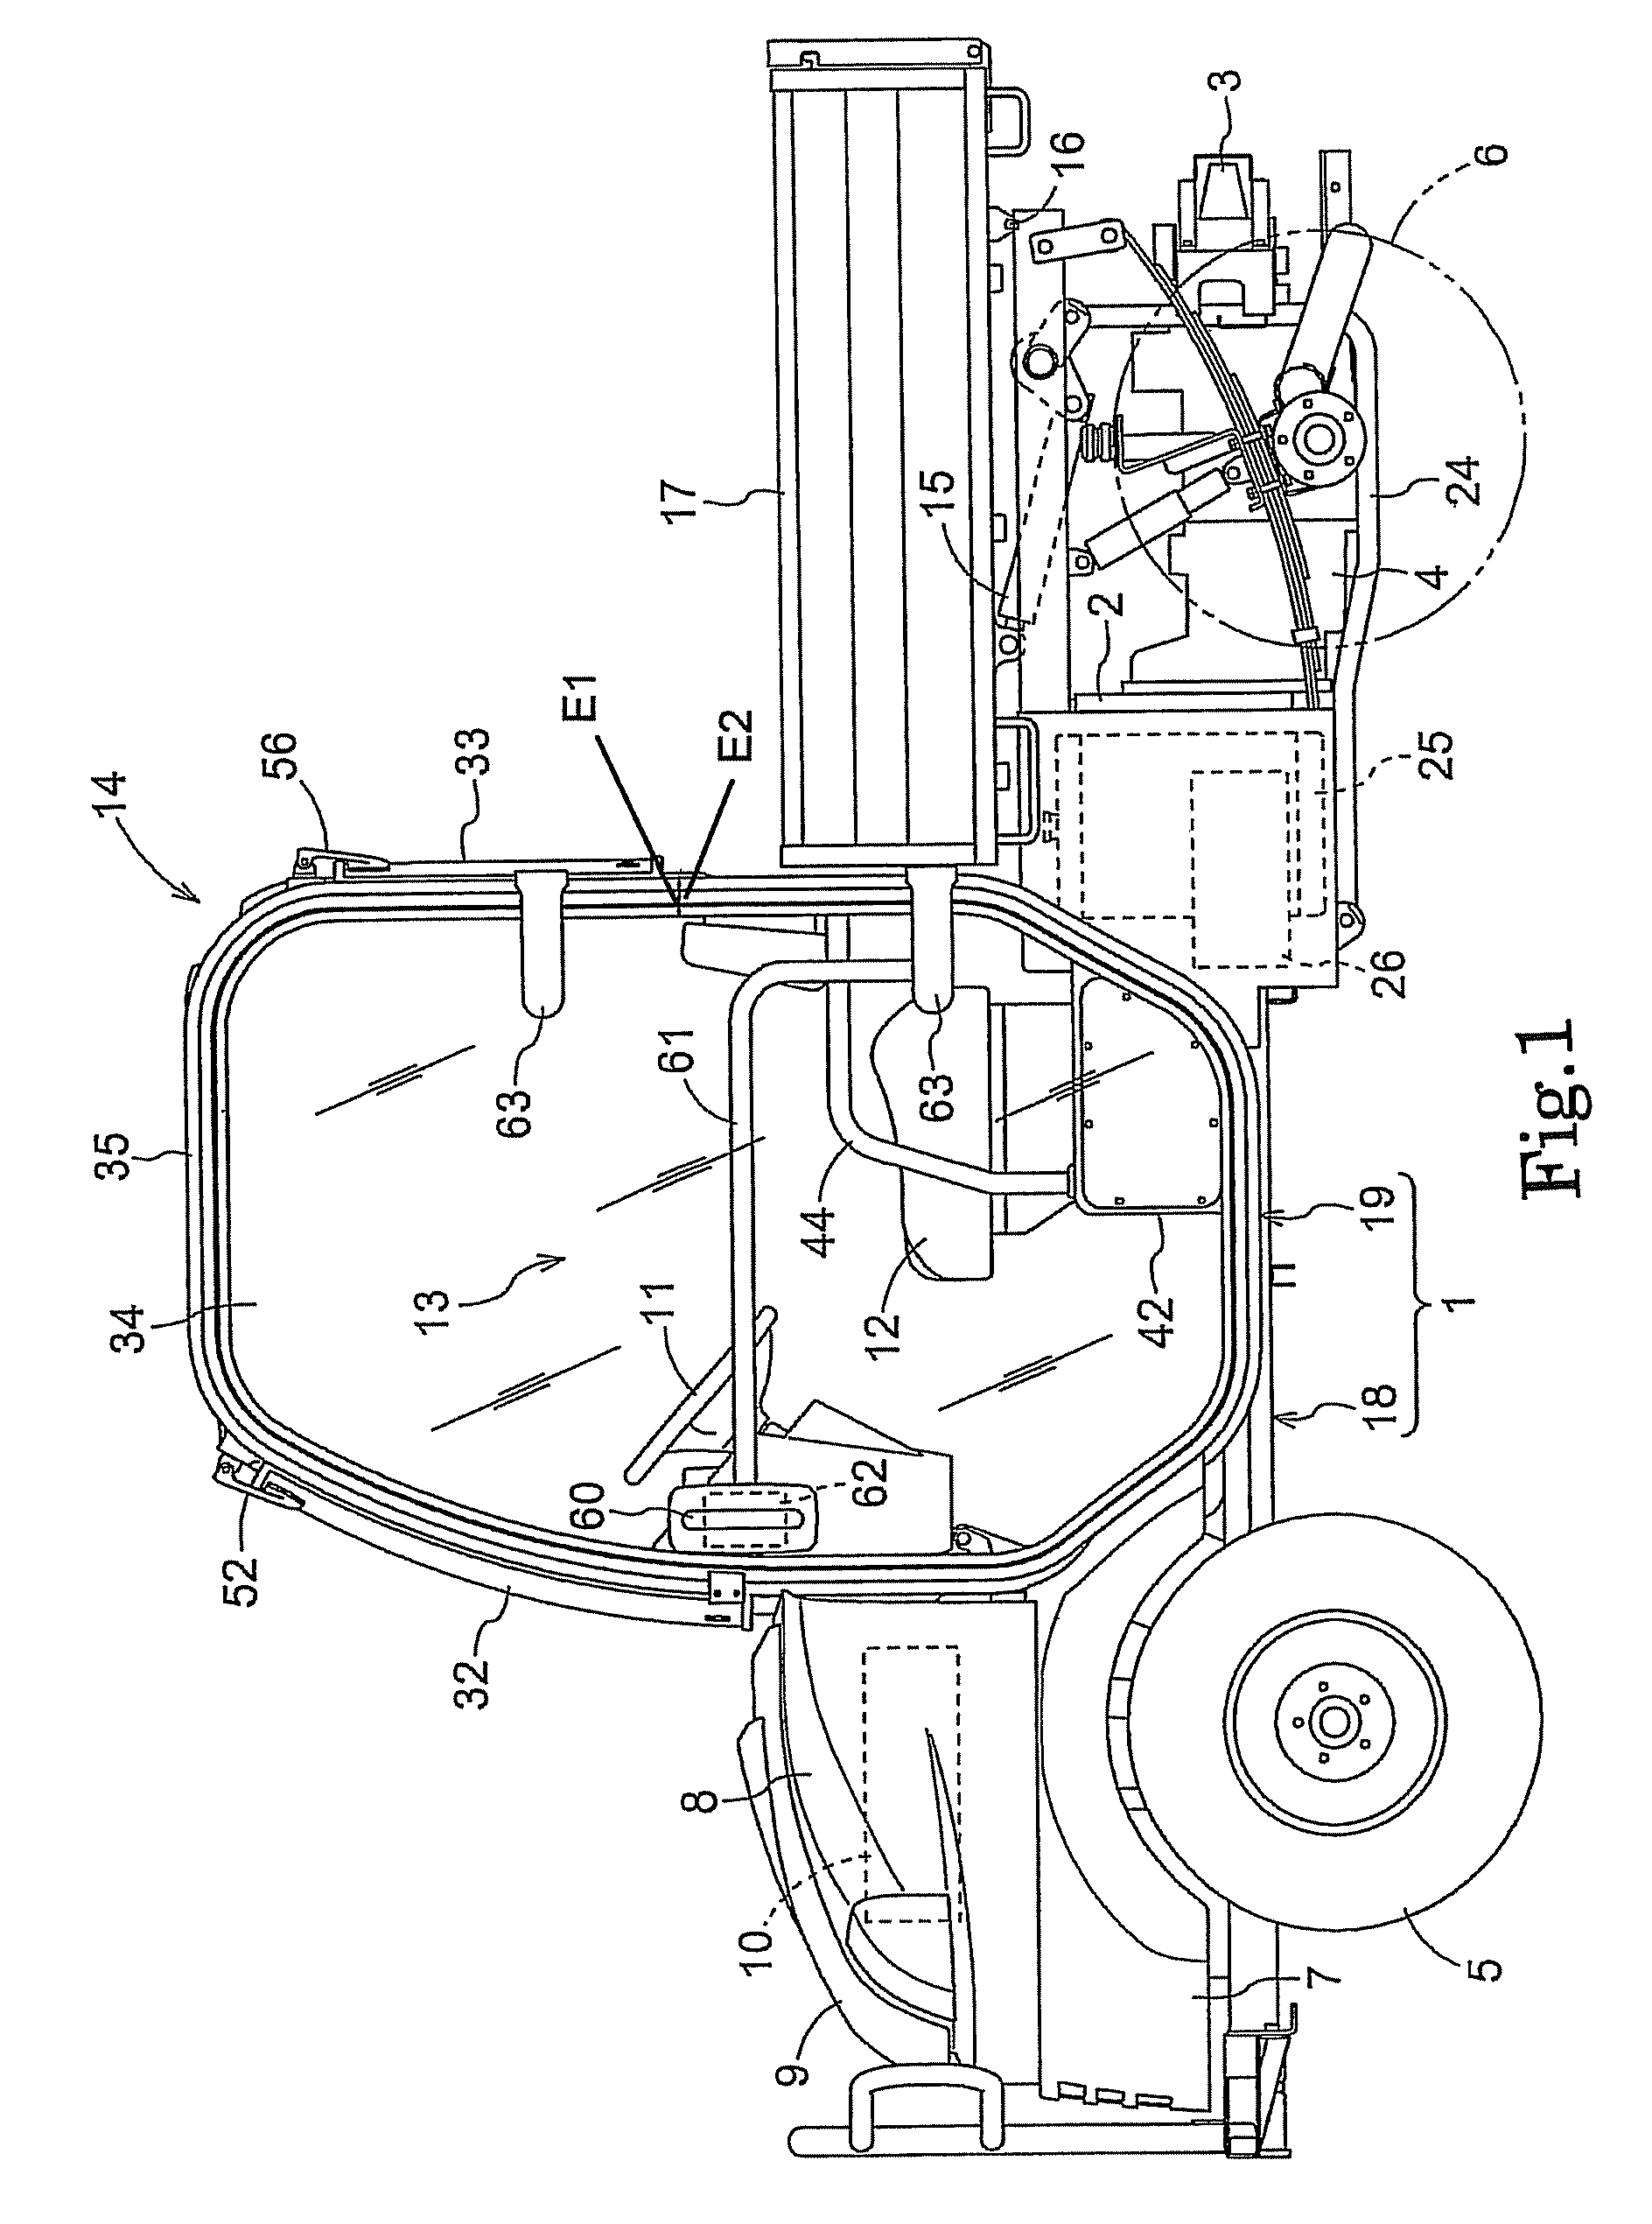 Vehicle frame for work vehicle and method for manufacturing same